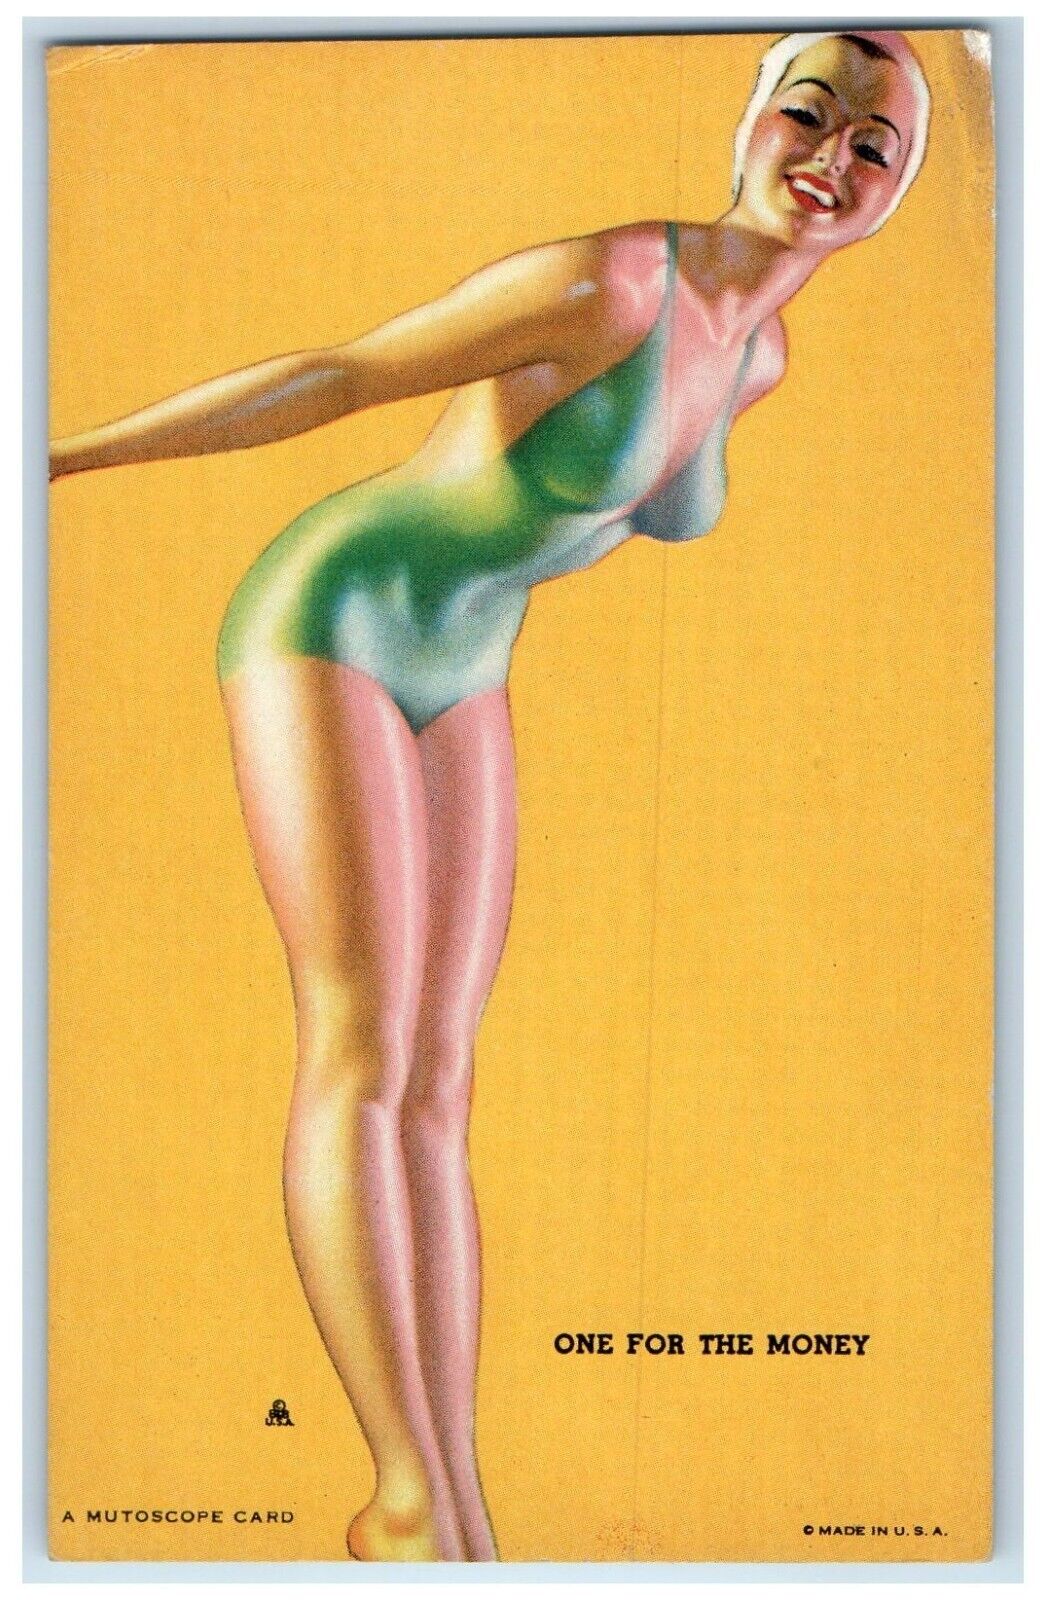 c1950's Mutoscope Glamour Girl Pin Up Sexy Go For The Money Exhibit Arcade Card